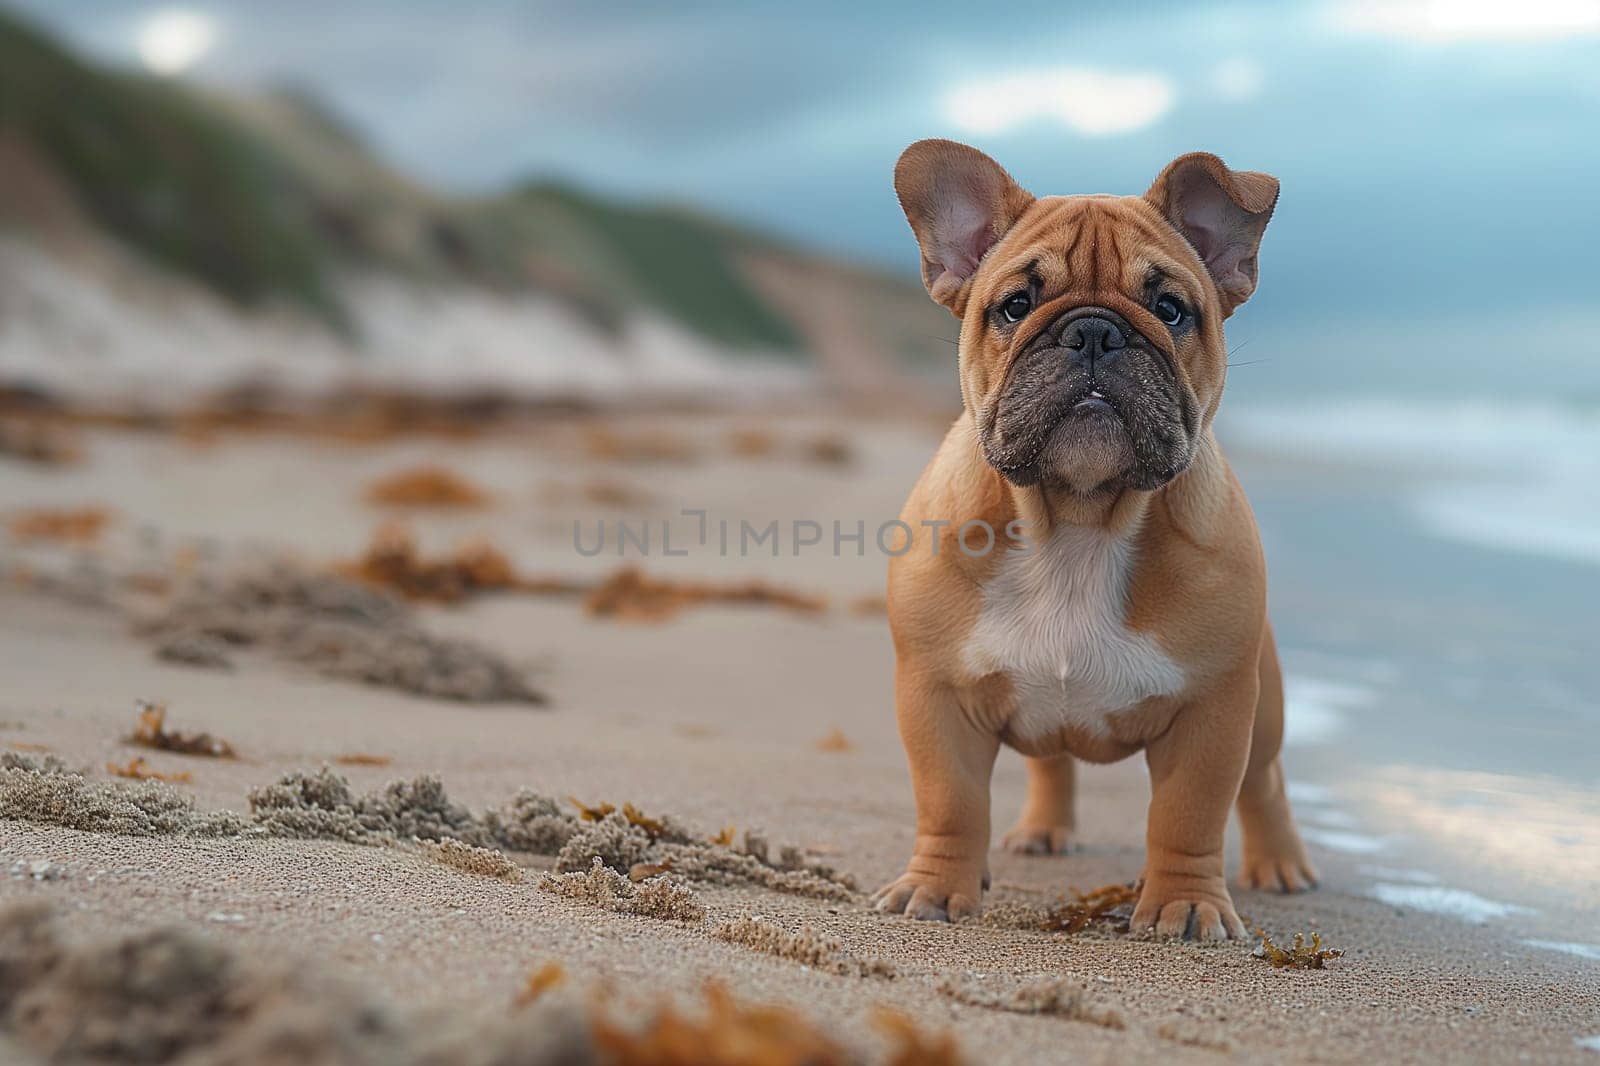 A French Bulldog relaxing on the beach during sunset by Hype2art